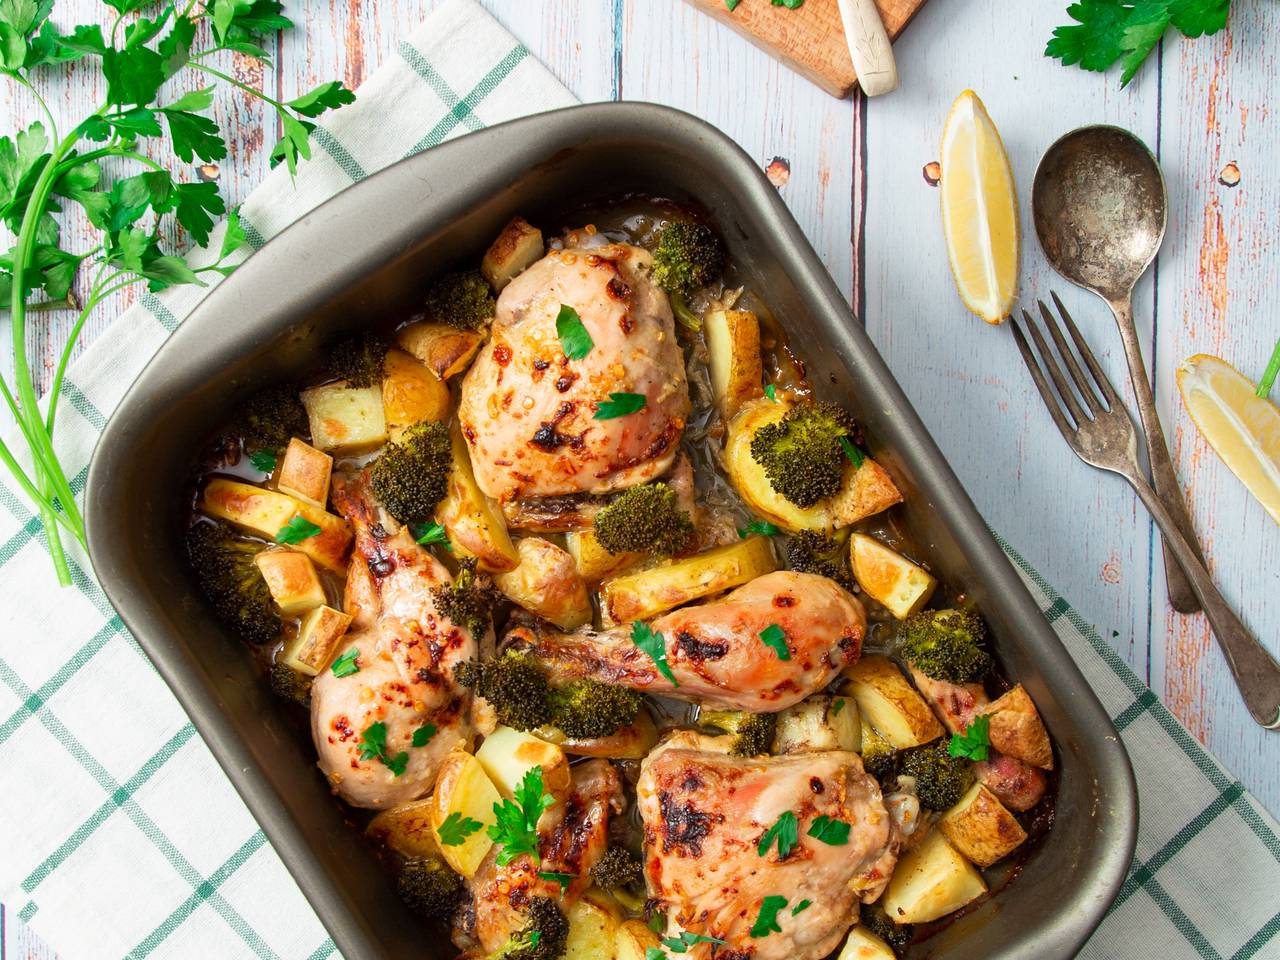 Baked Chicken Legs and Vegetables